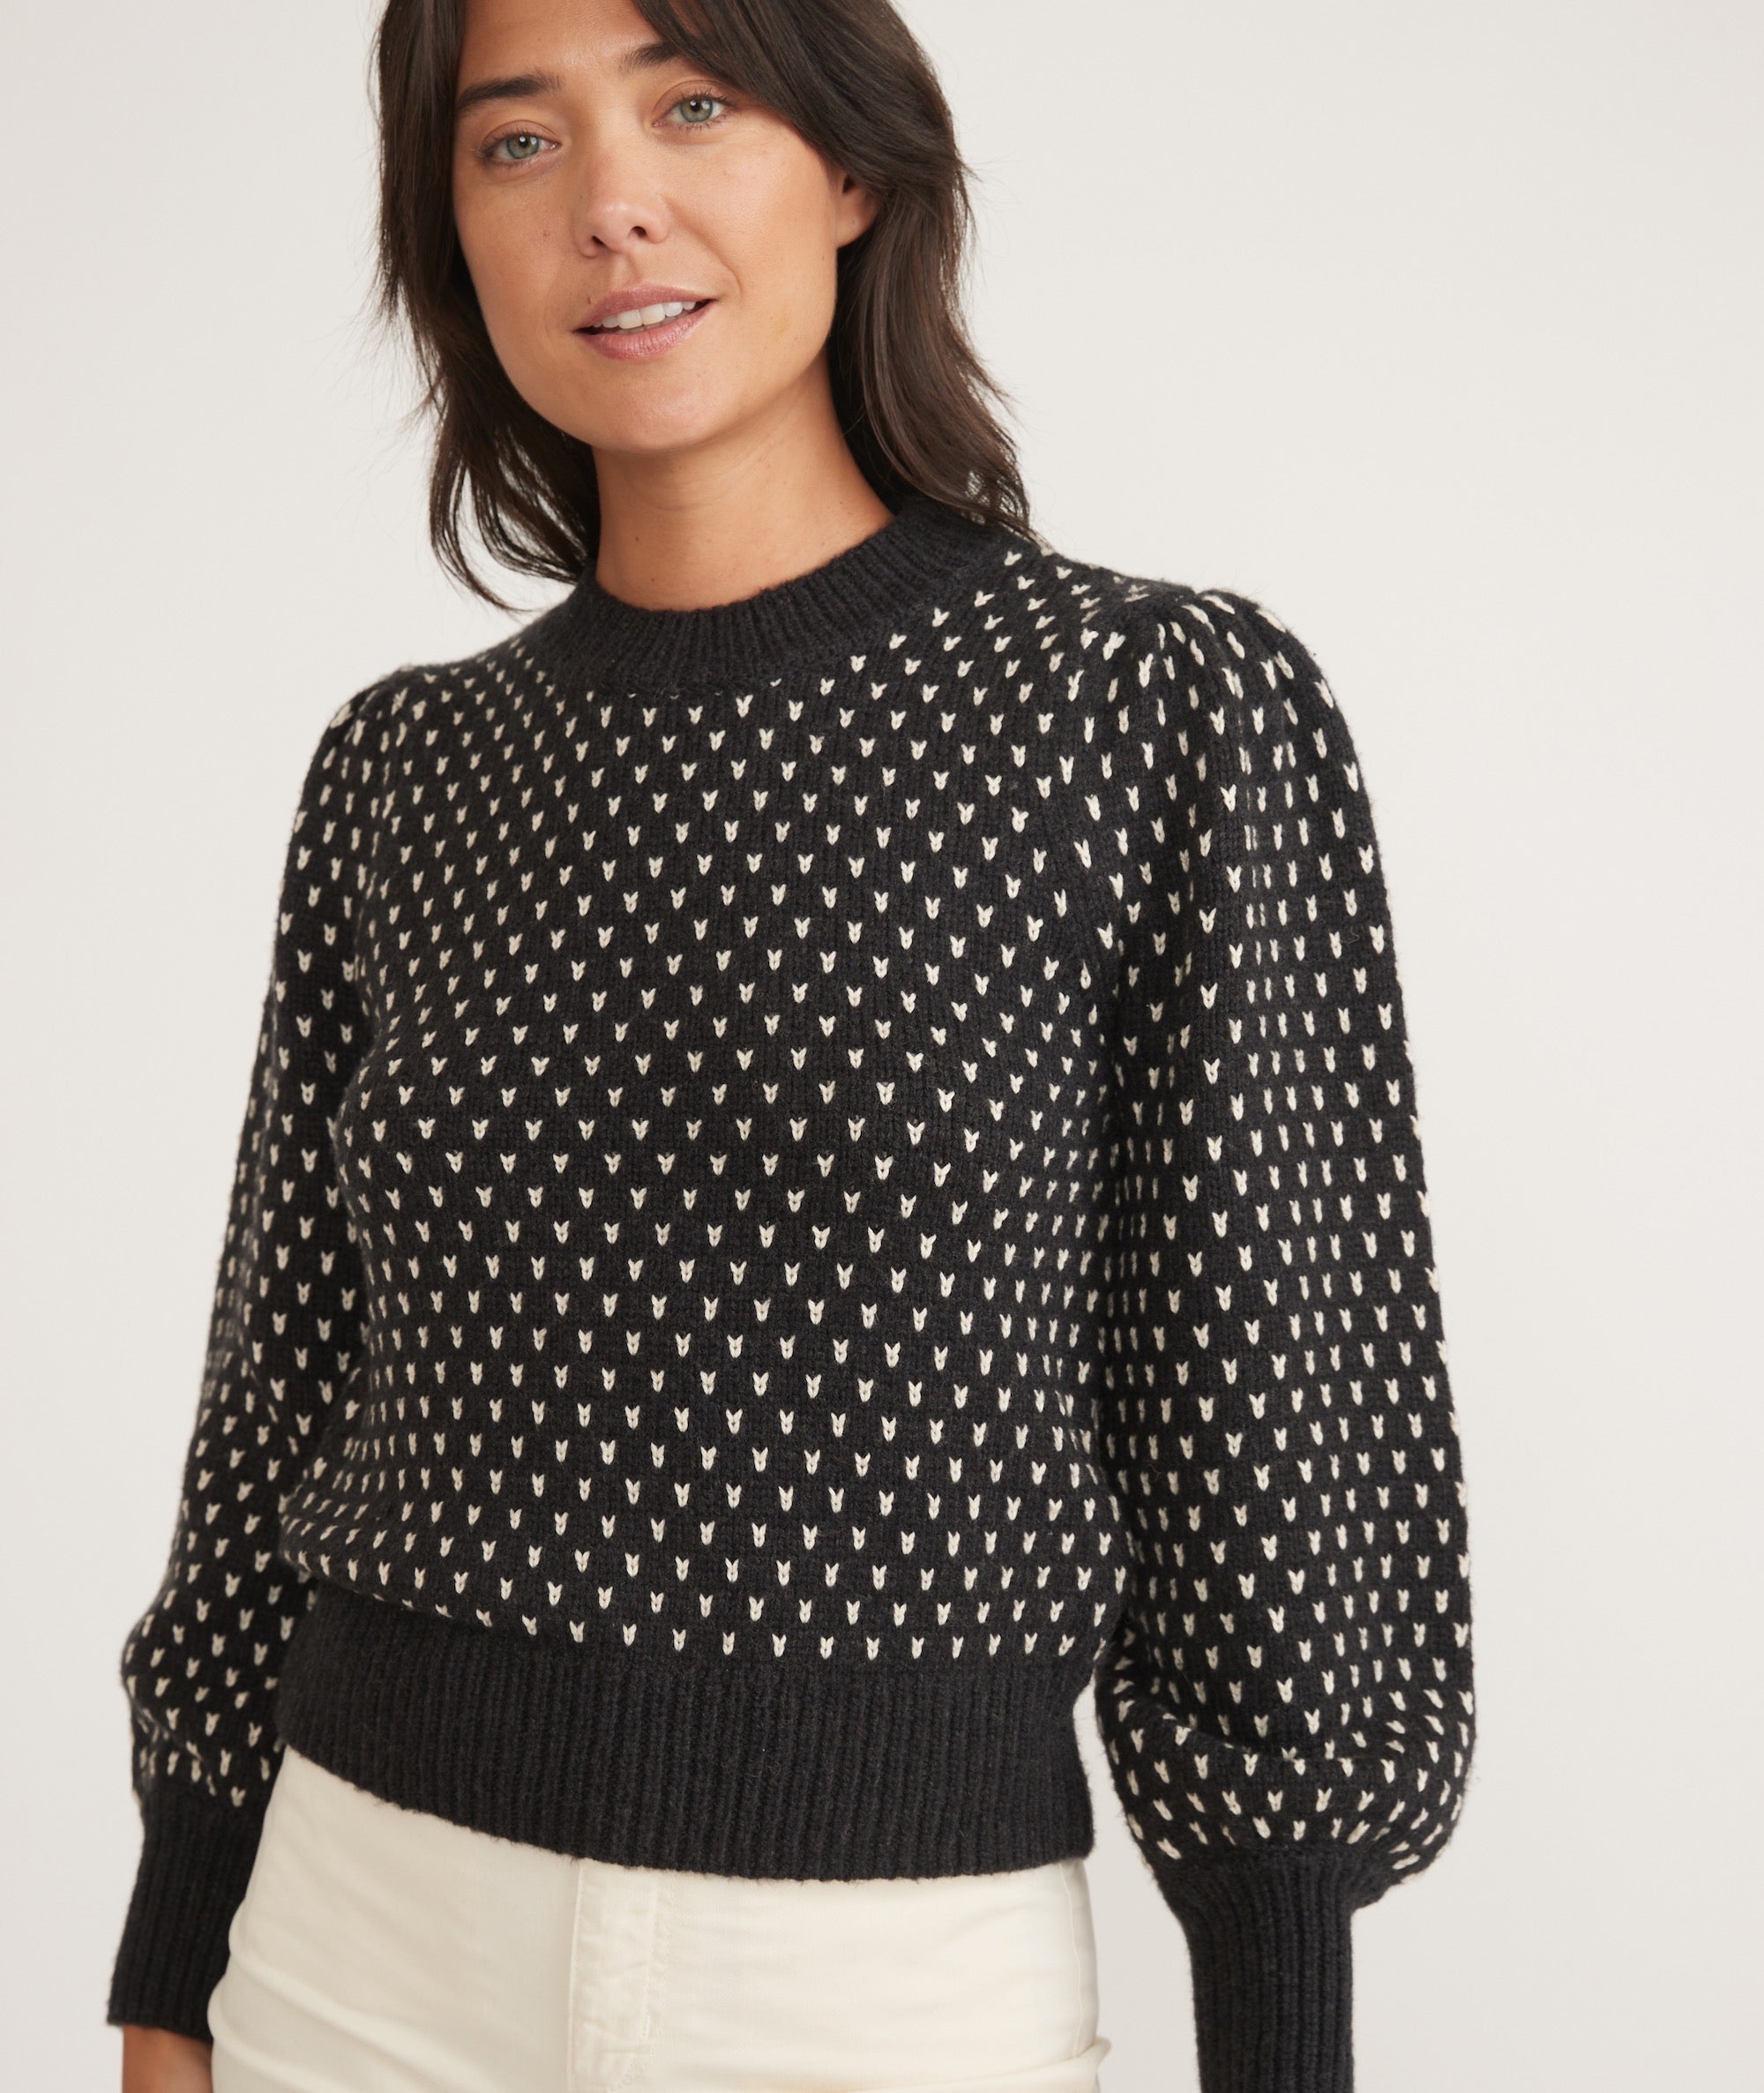 Alma Puff Sleeve Sweater in Black and White